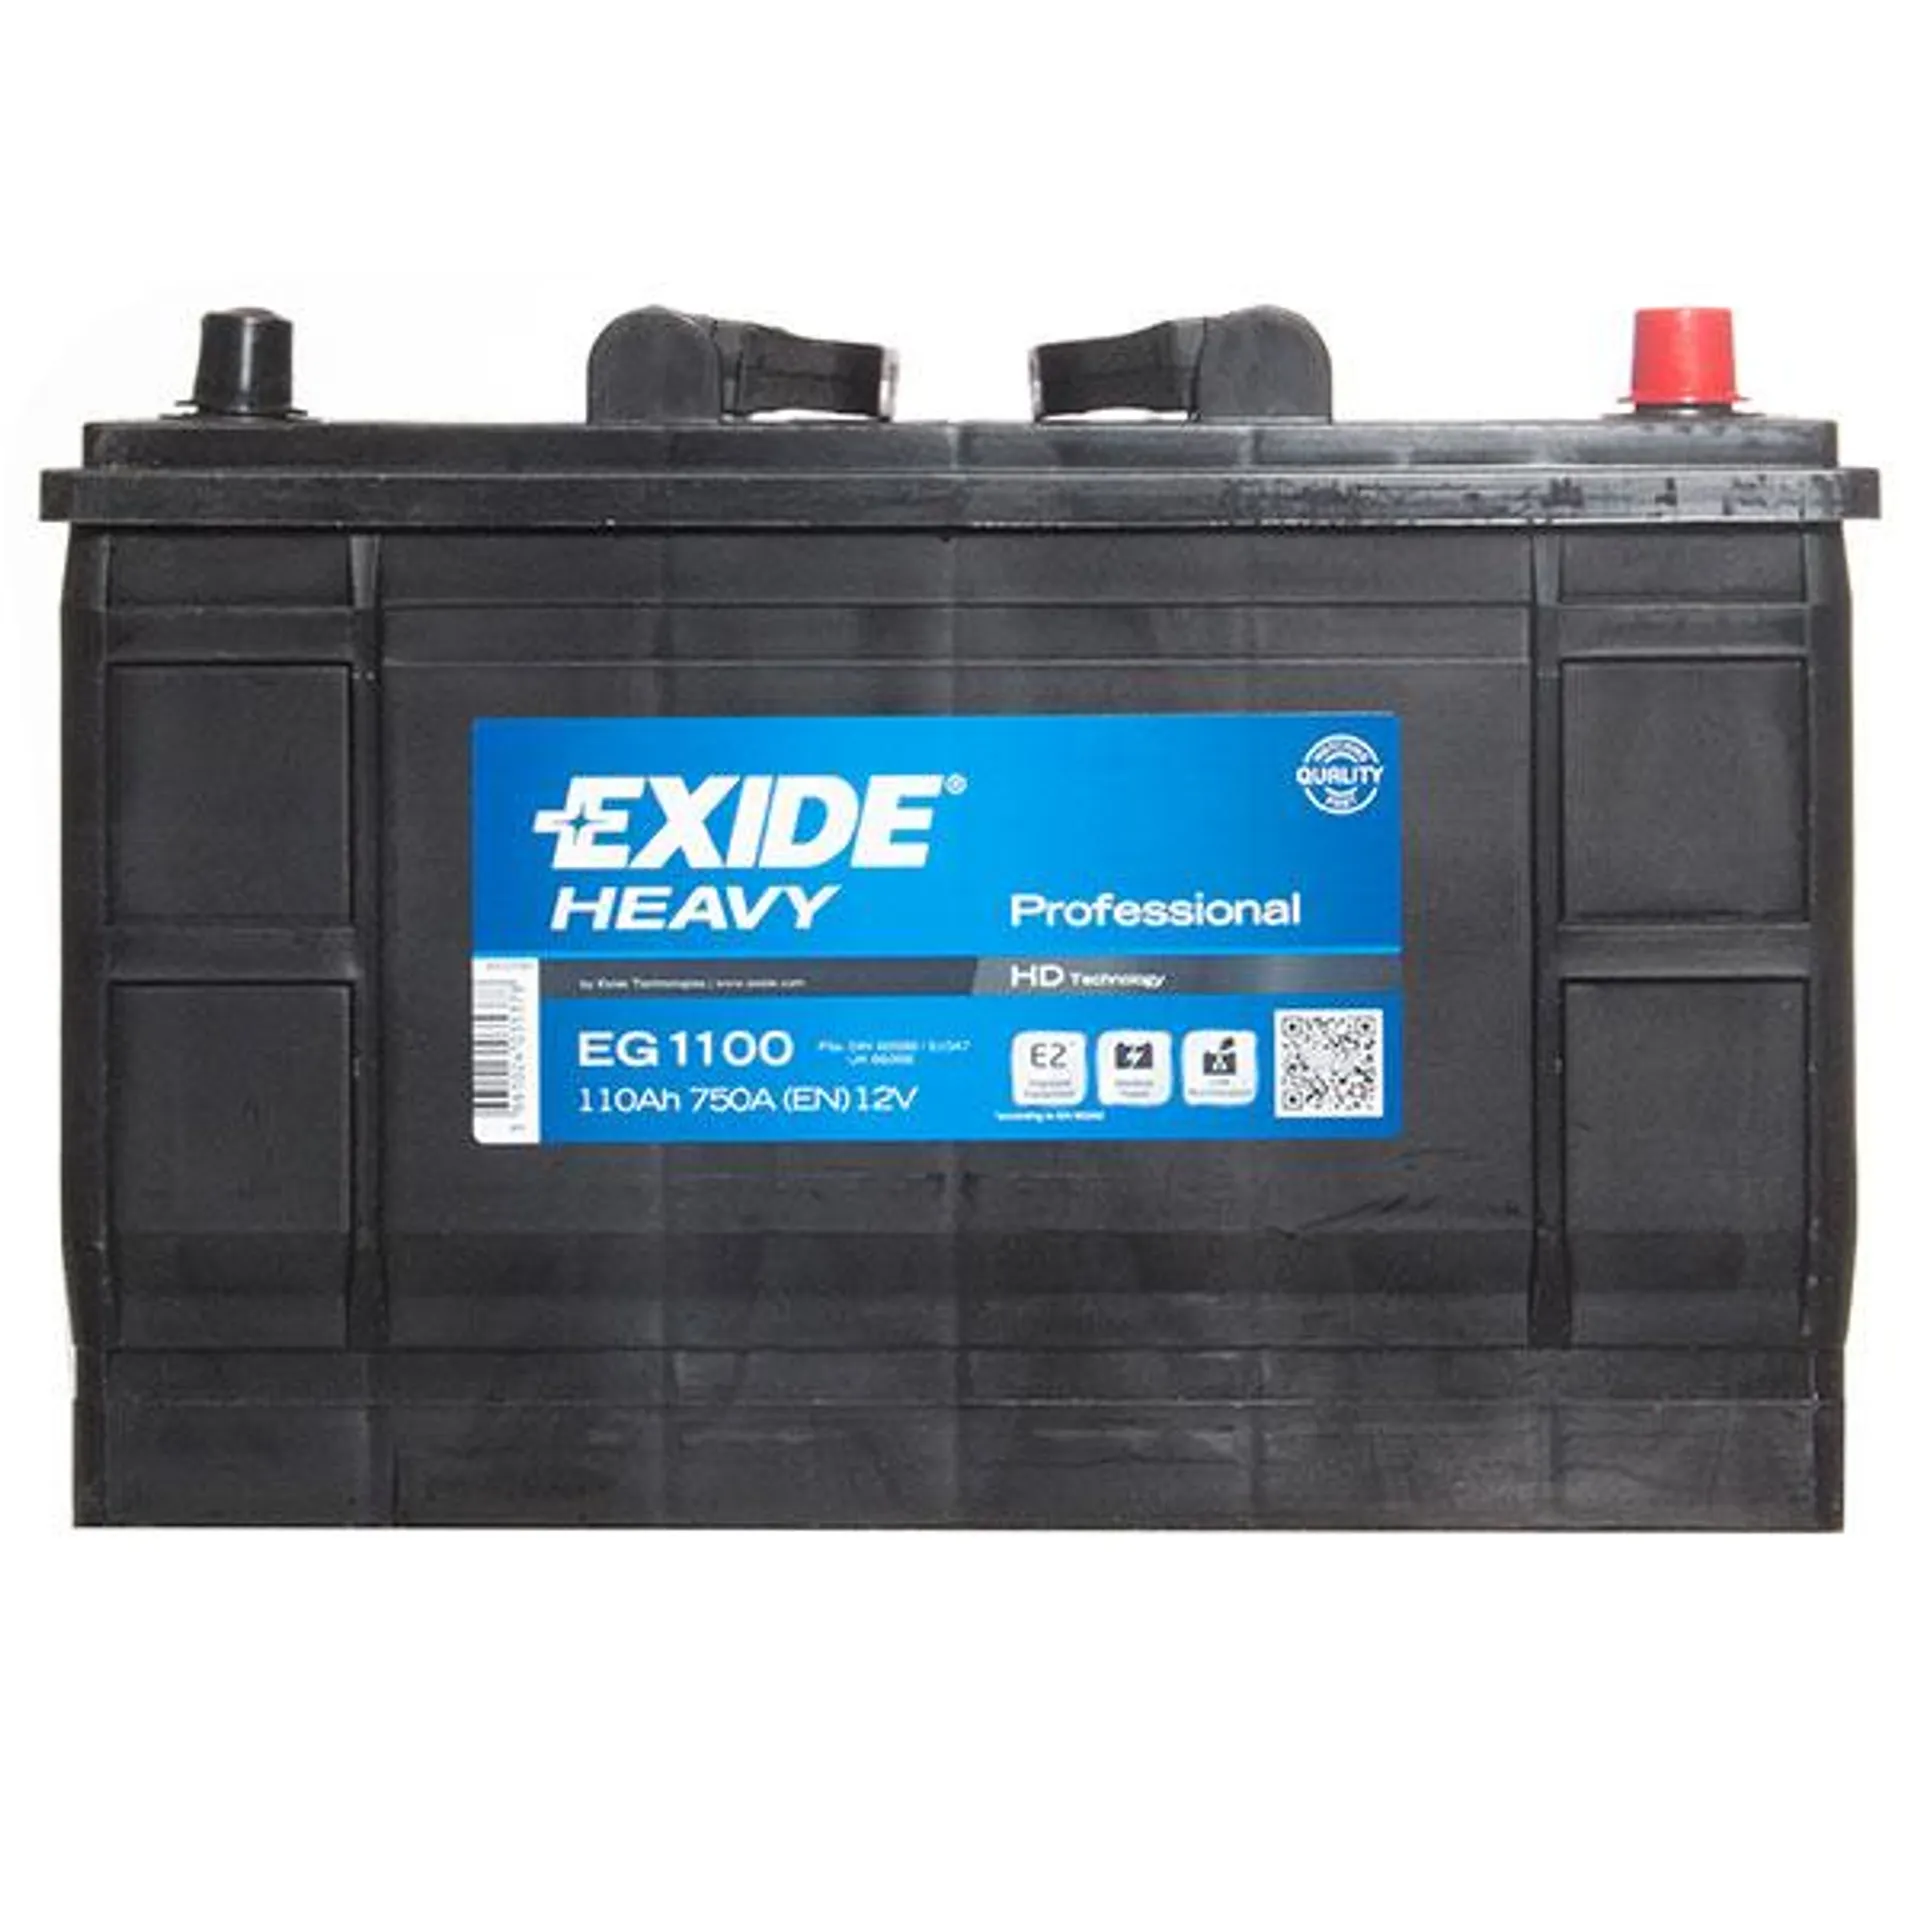 Exide Commercial Battery 663 - 2 Year Guarantee